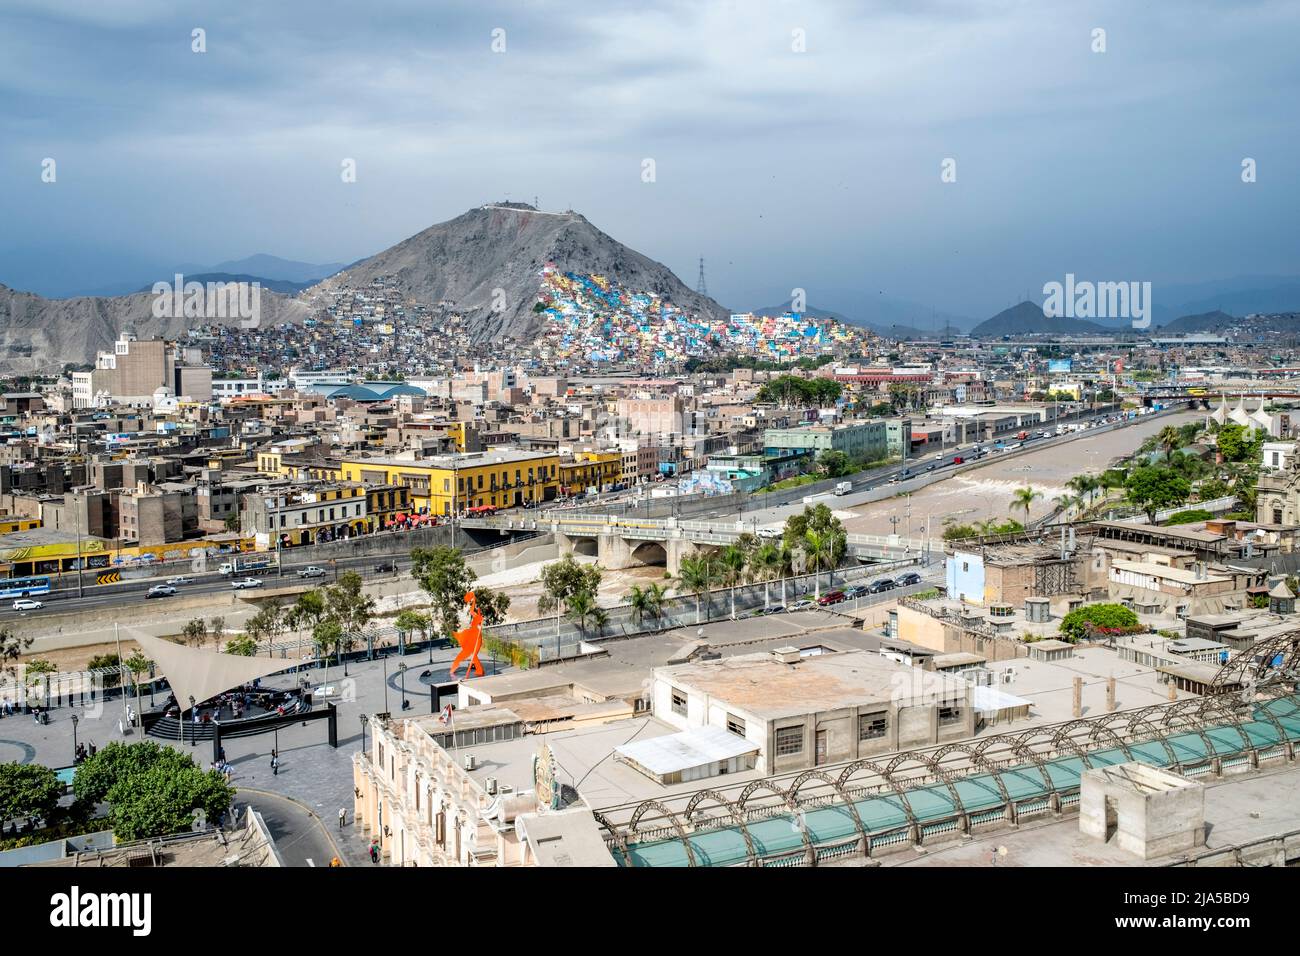 A View Of A Colourful Neighbourhood In Lima, Peru. Stock Photo